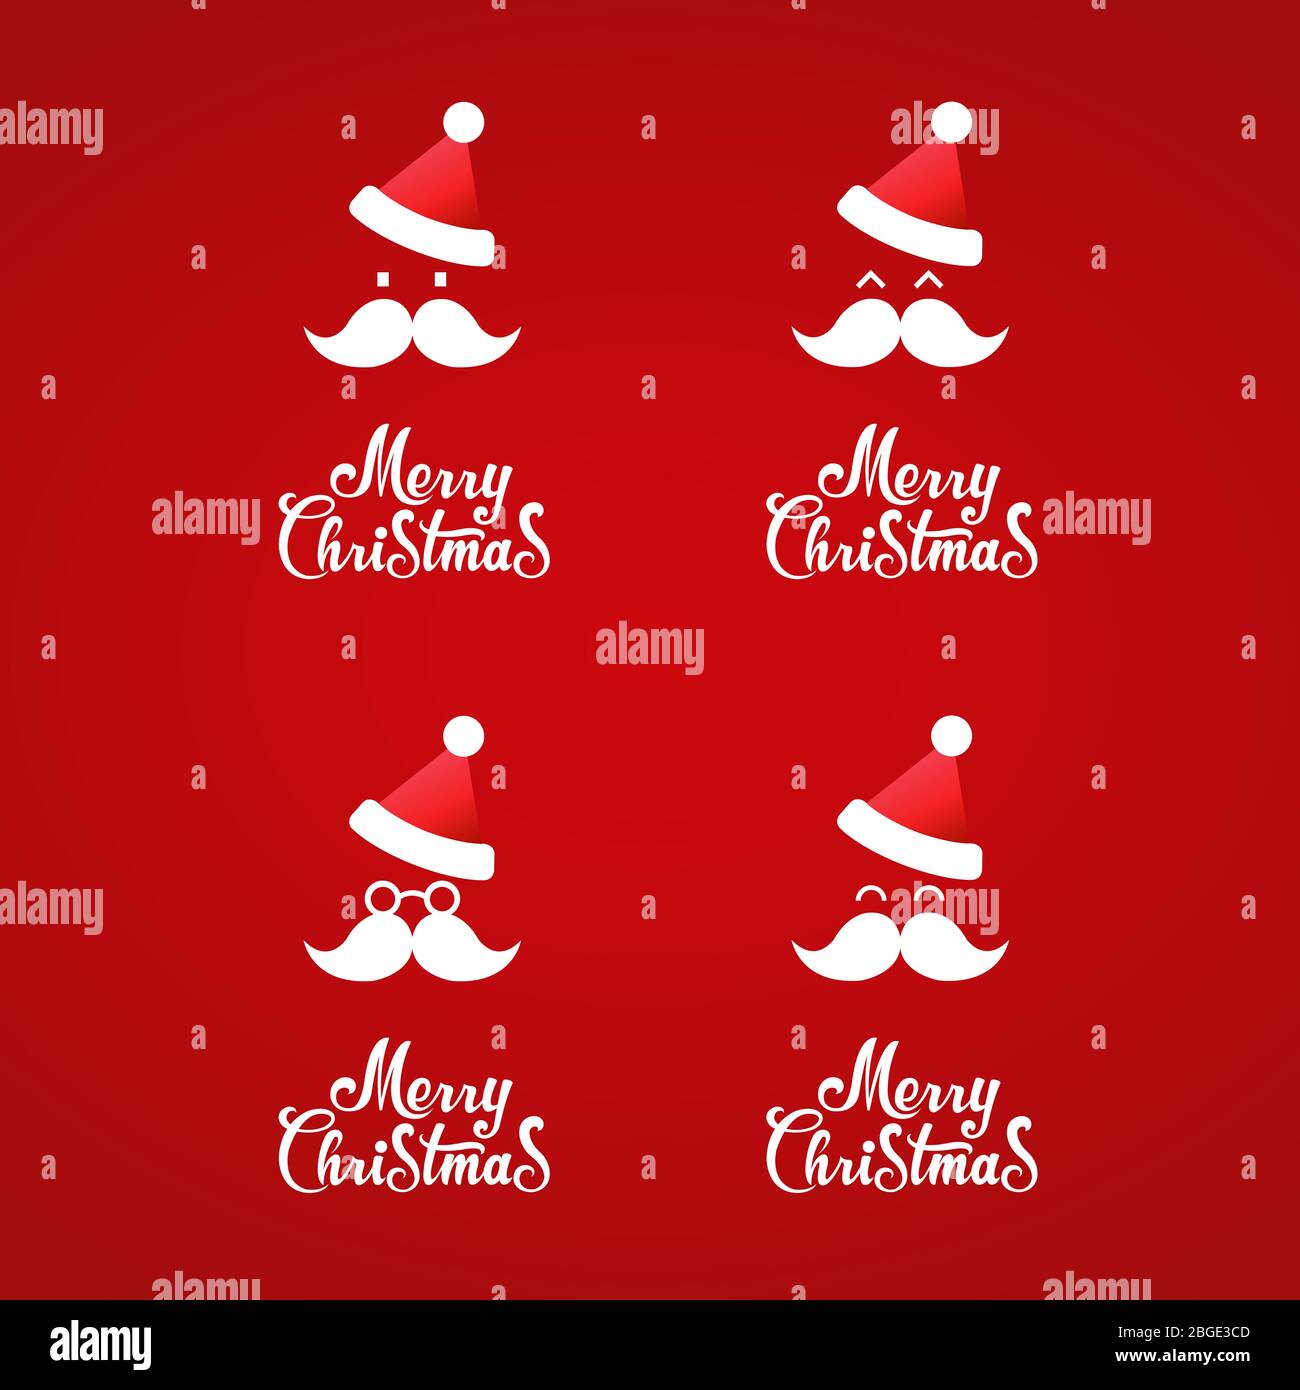 Collection of Santa faces and merry christmas text. vector. Stock Vector